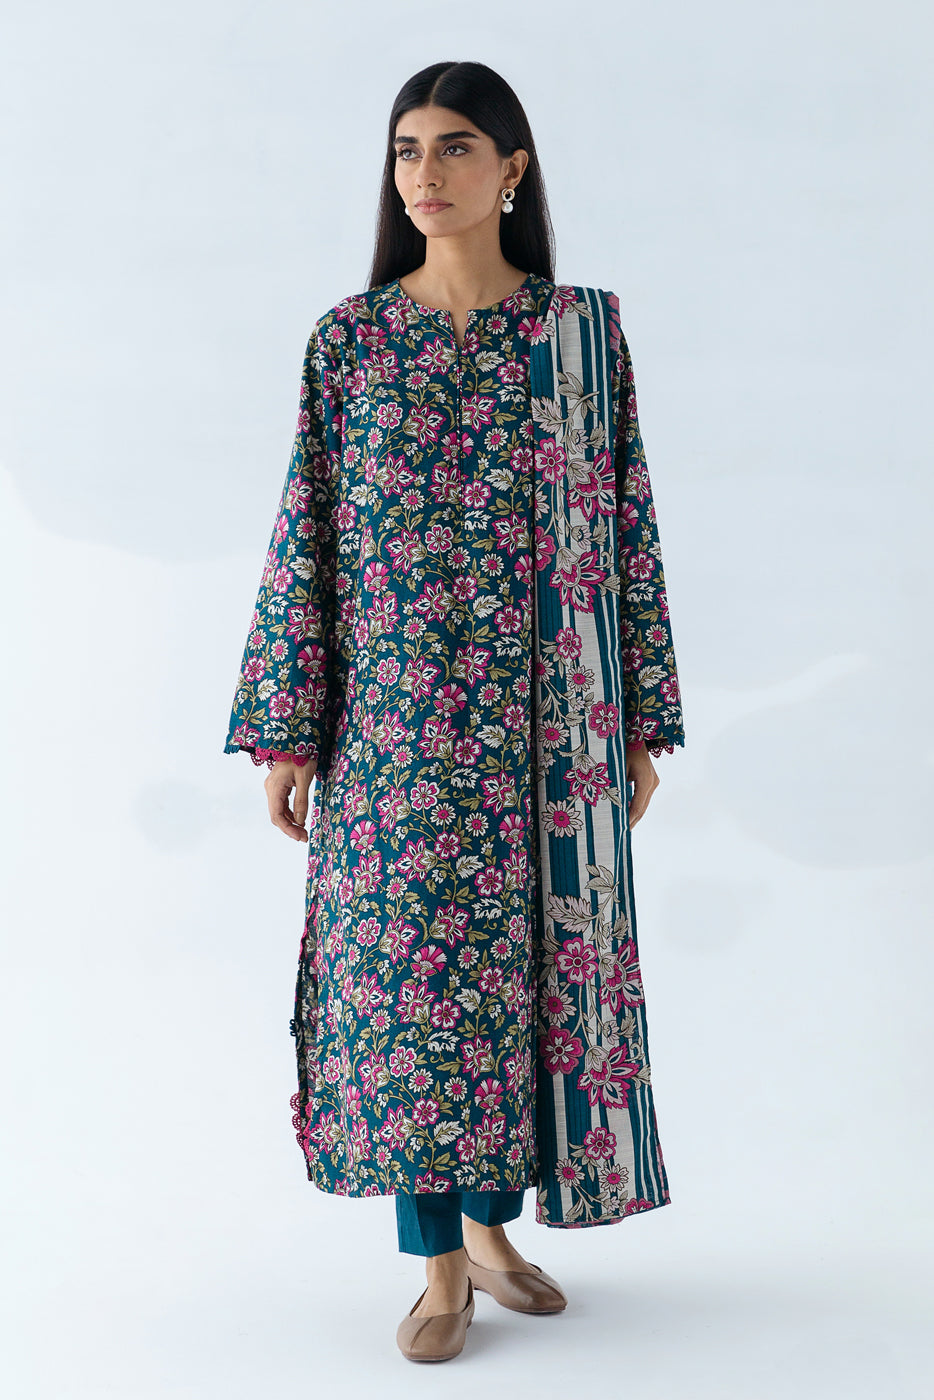 2 PIECE - PRINTED KHADDAR SUIT - BERYL BLOOM (UNSTITCHED) - BEECHTREE